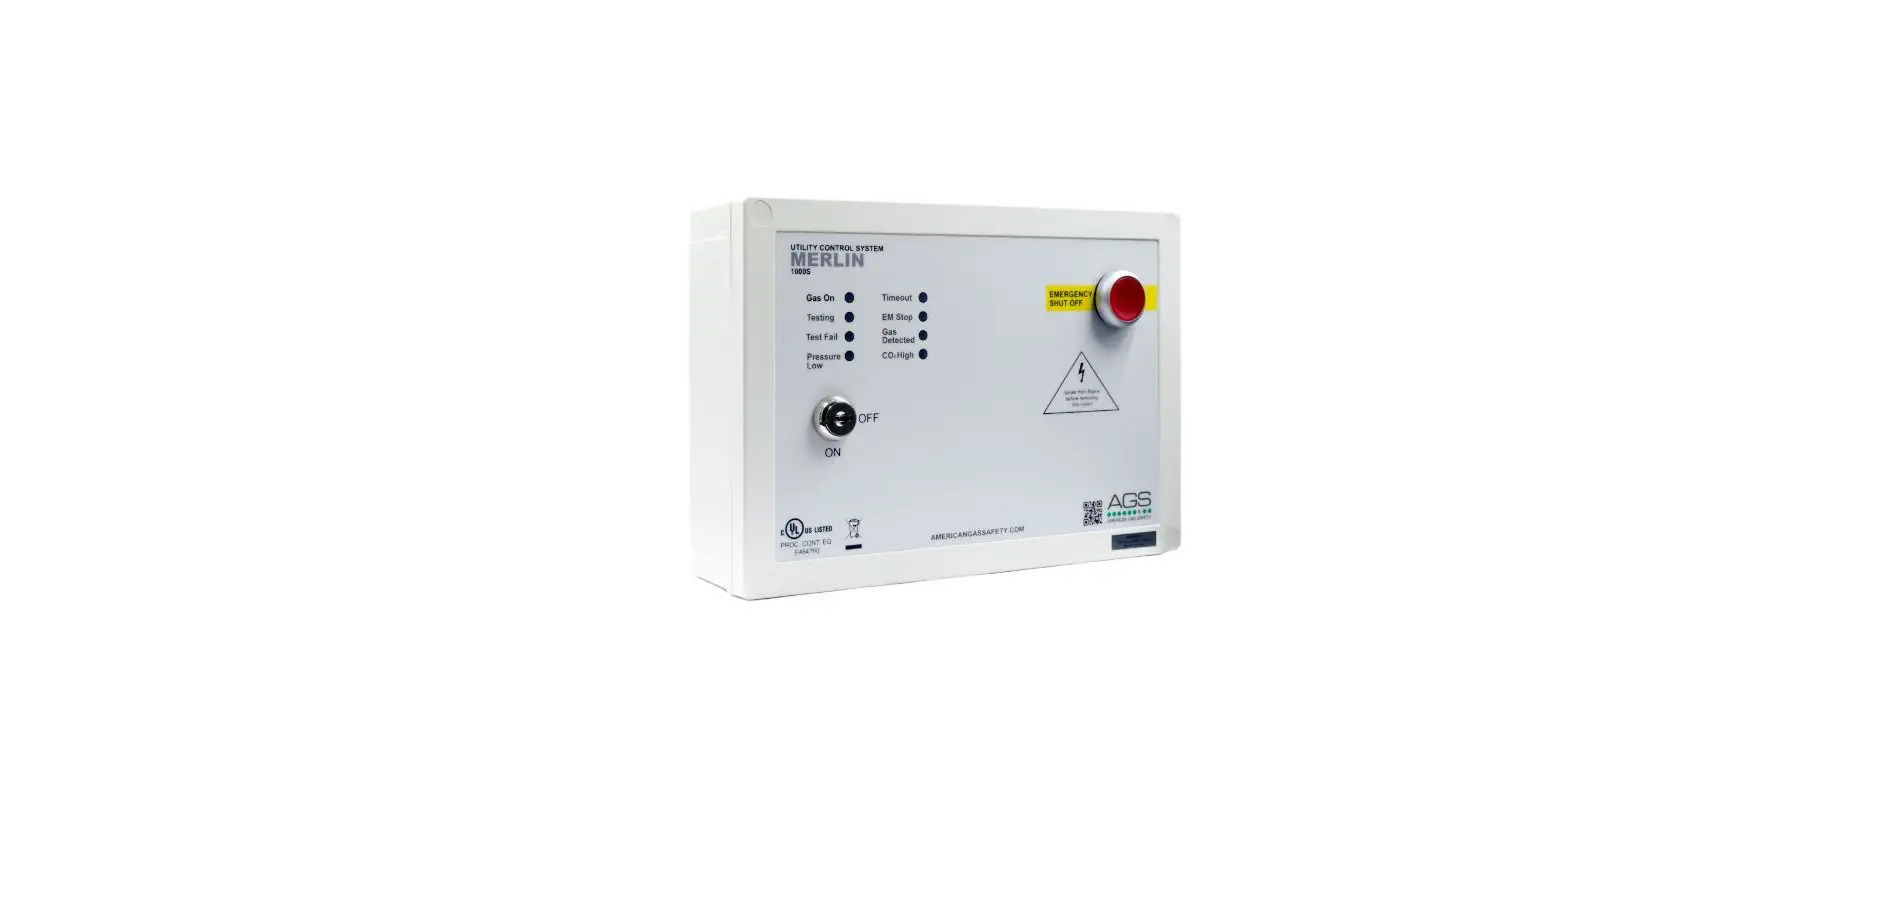 Merlin 1000S Gas Proving and Isolation Controller